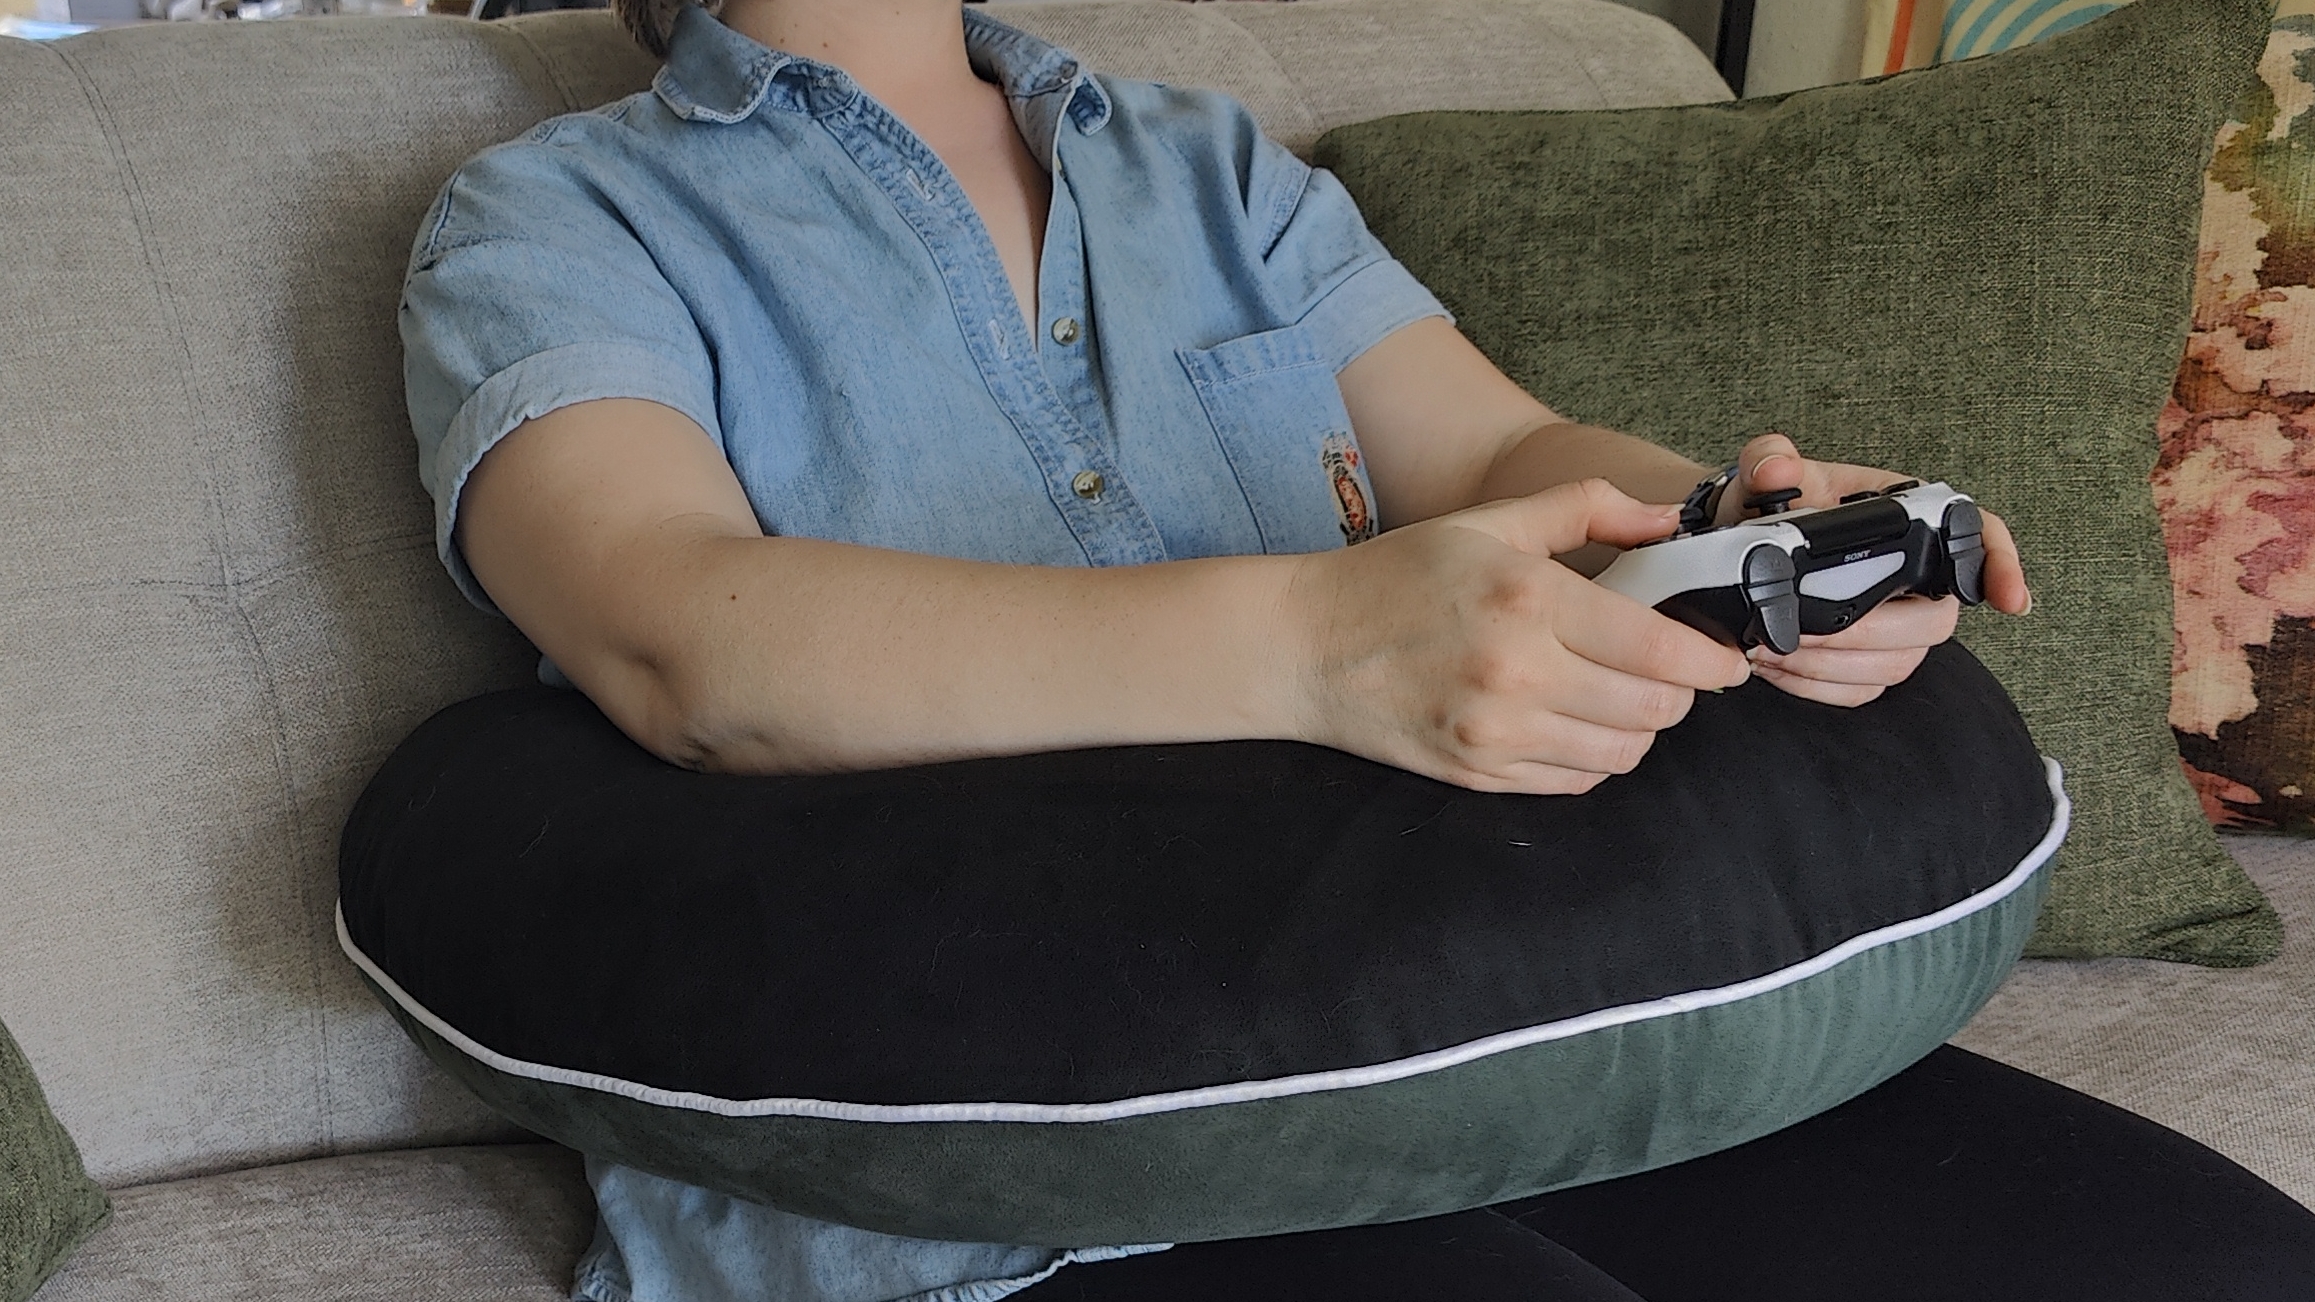 A person sitting on a couch with the Valari Gaming Pillow around their waste. Their elbows and arms are supported by the pillow and they're holding a PlayStation controller.